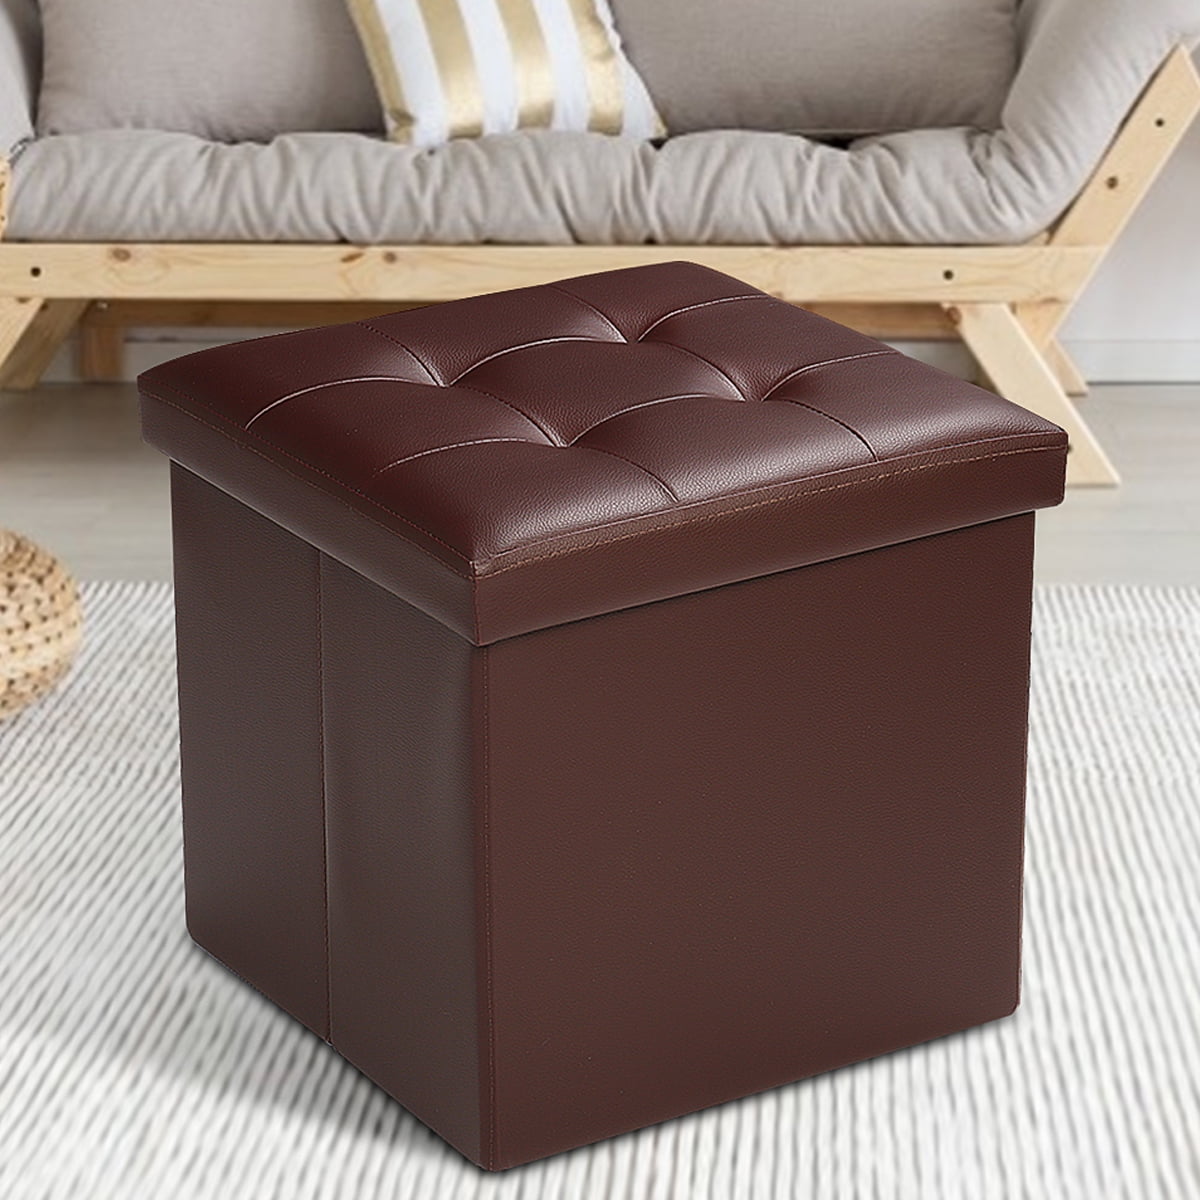 Square 15 Storage Ottoman Folding, Living Room Chair With Storage Ottoman